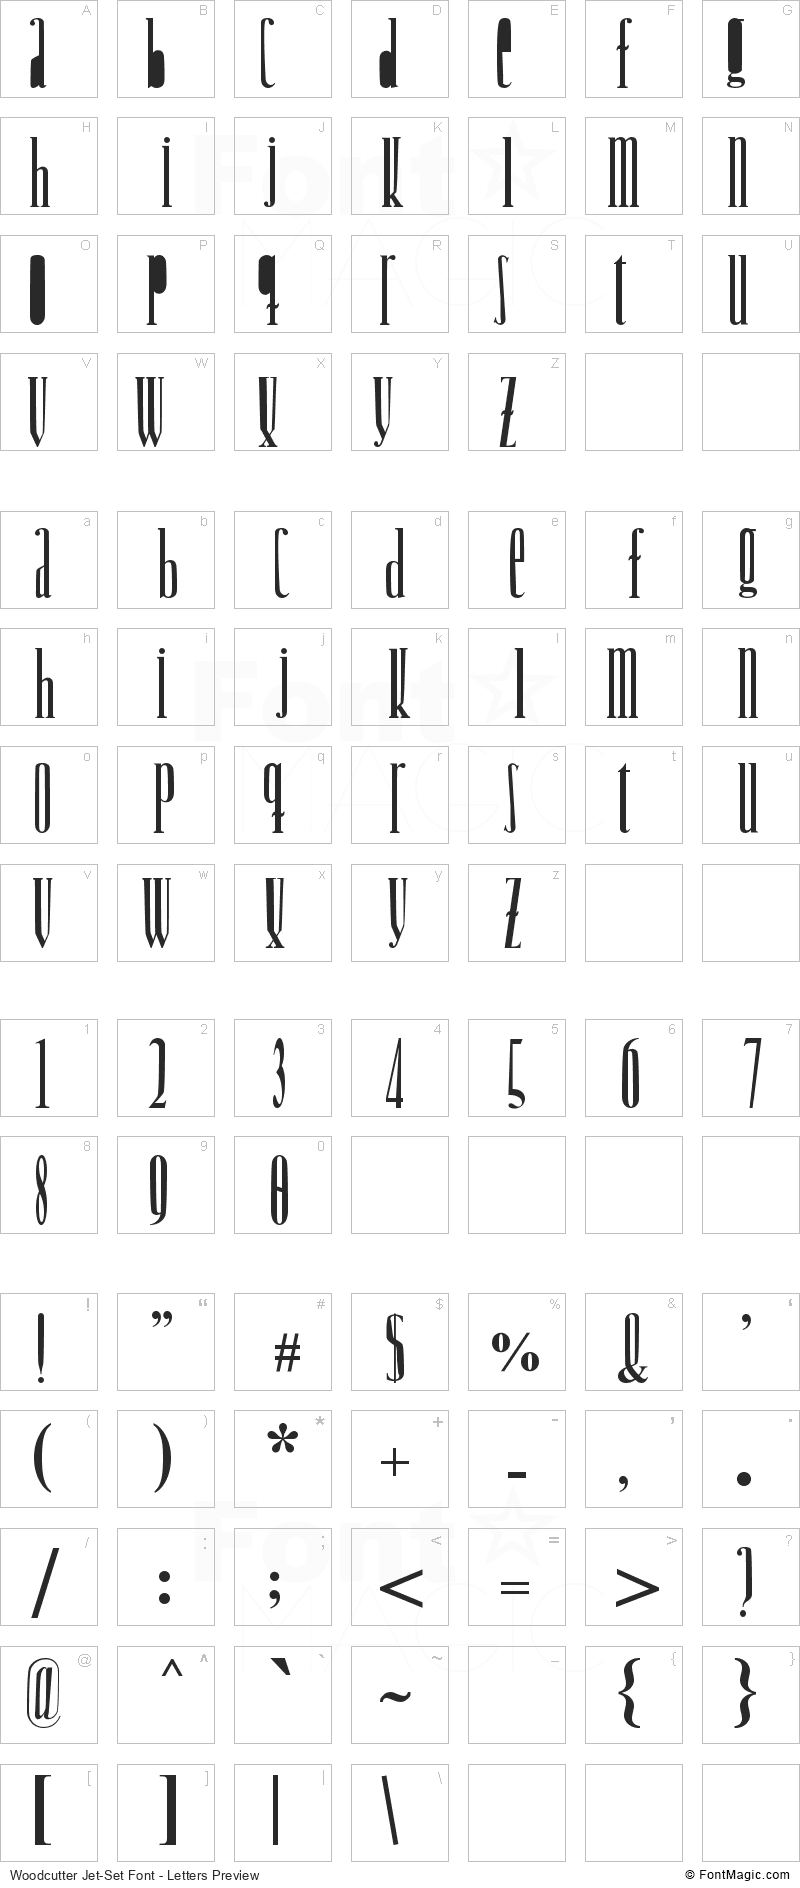 Woodcutter Jet-Set Font - All Latters Preview Chart